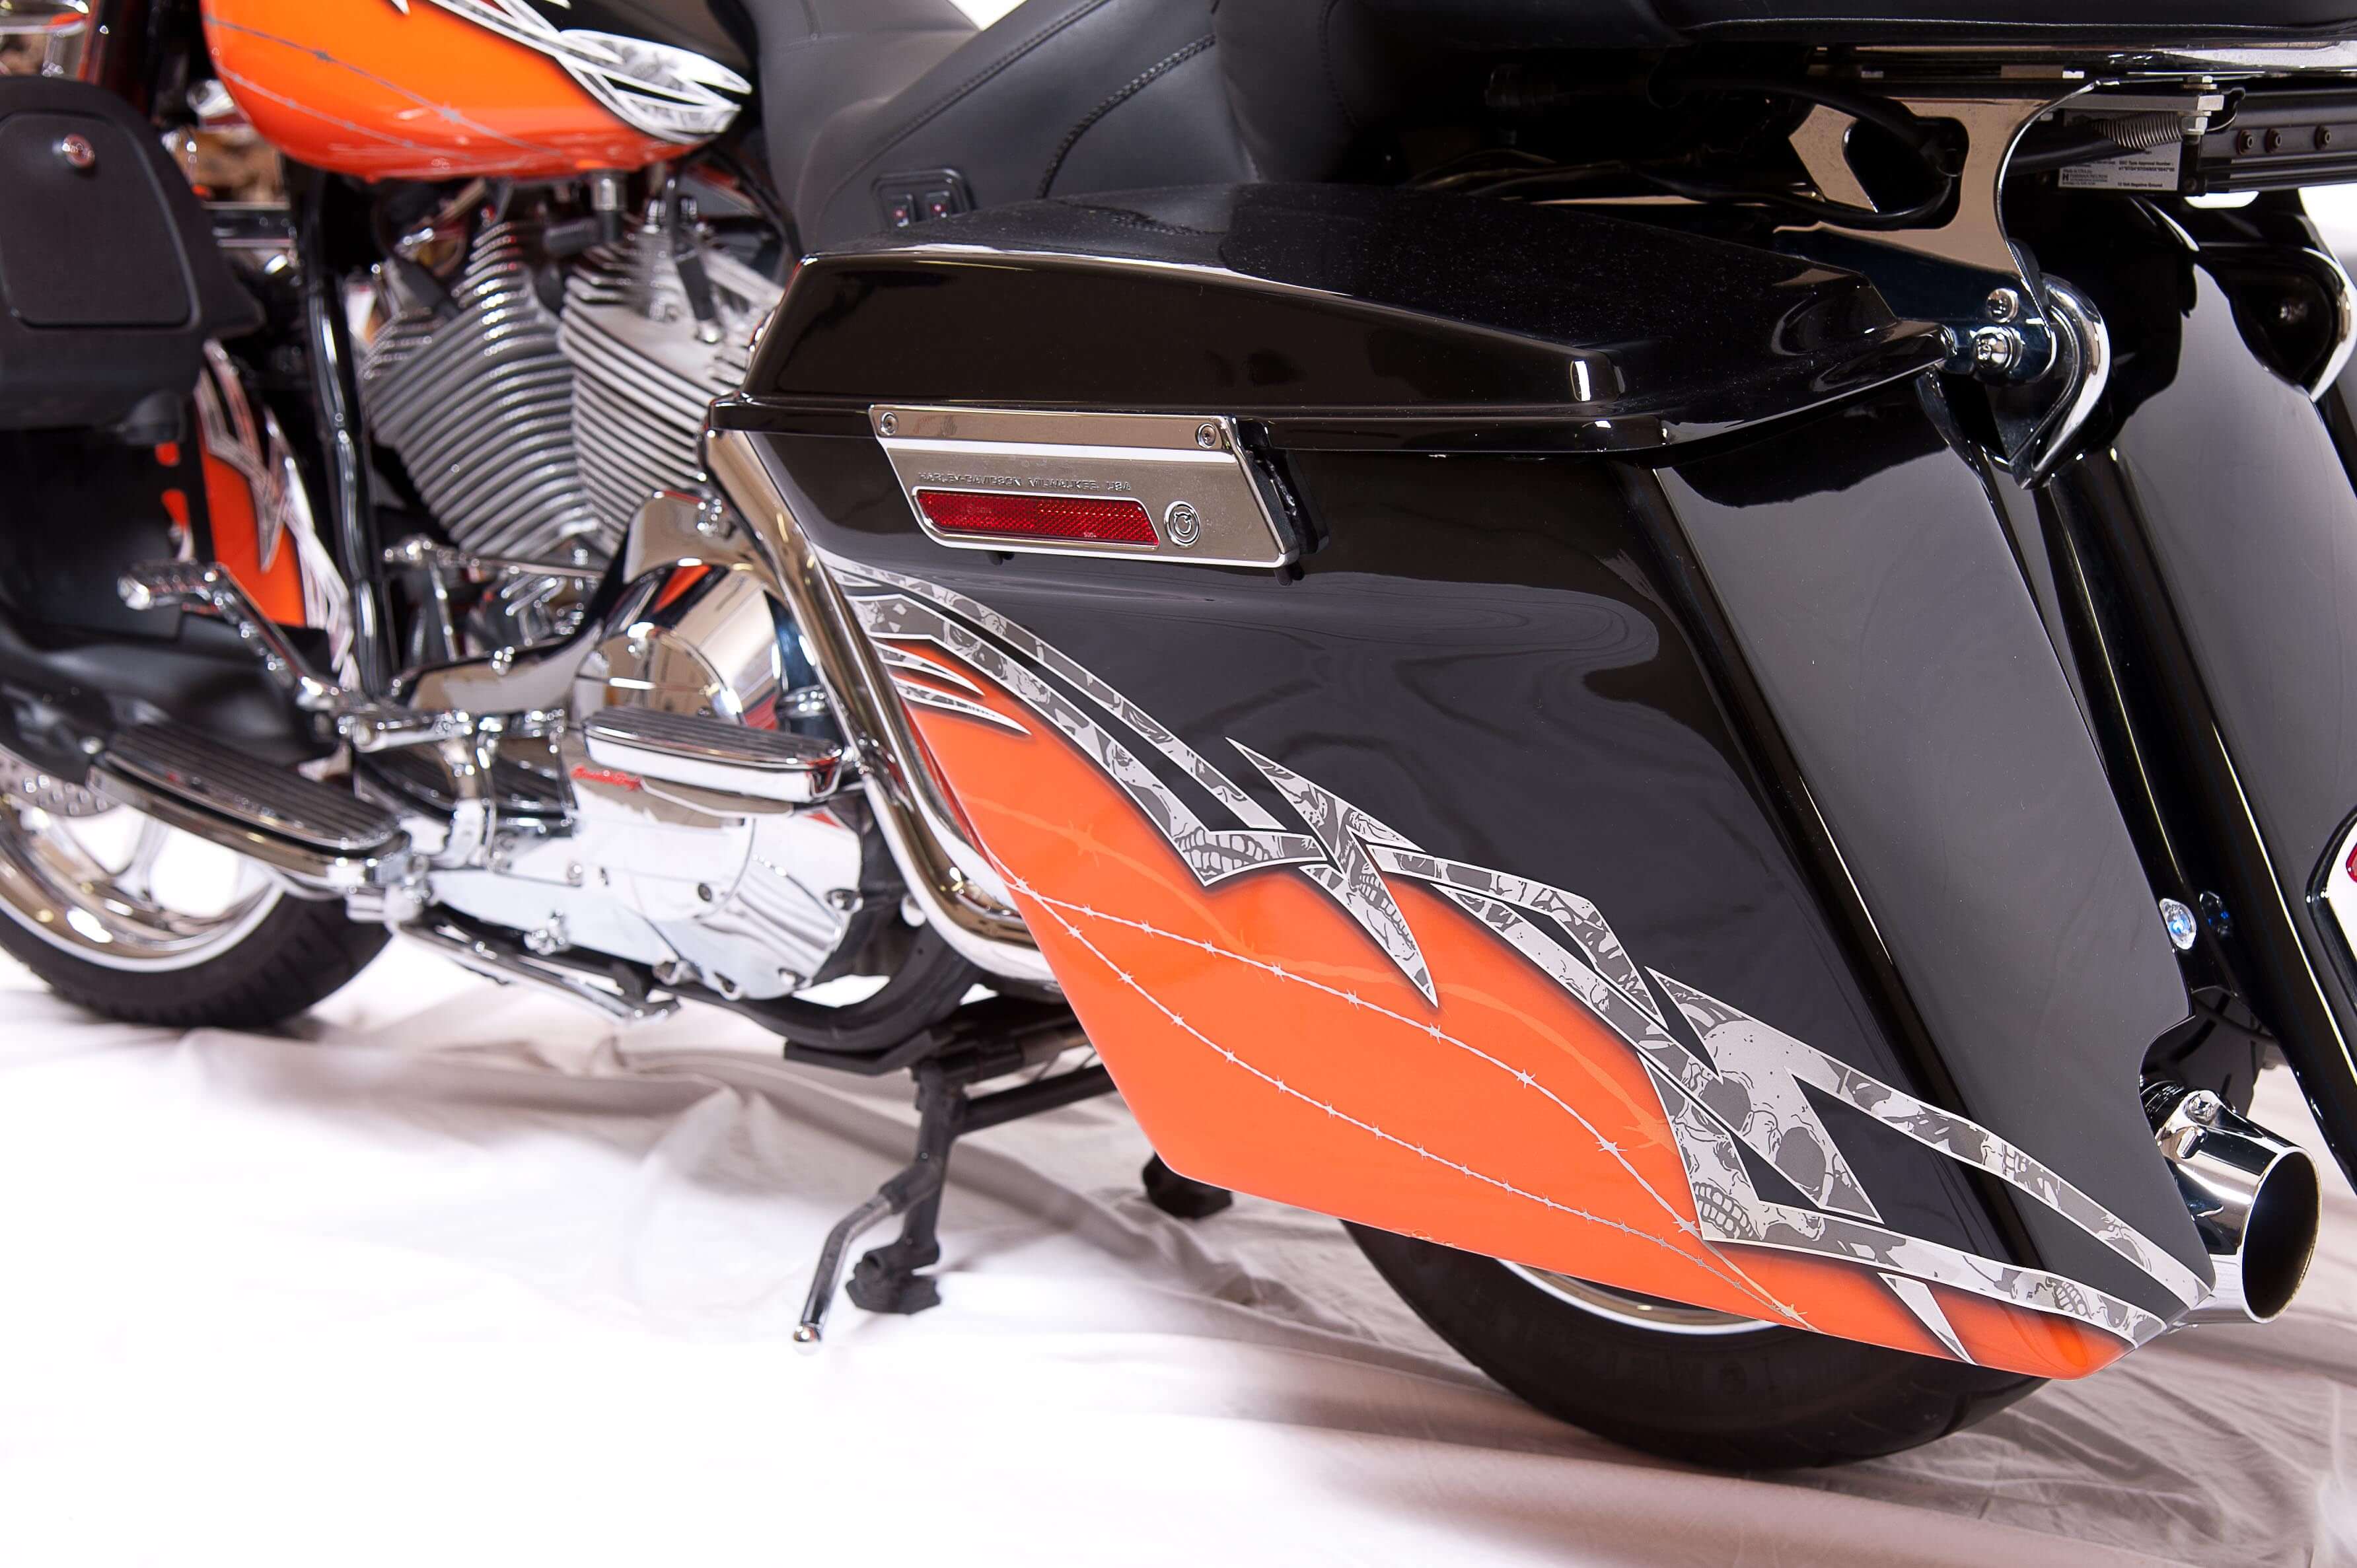 Saddlebags Tail Dragger 5 inch Extended with Speaker Lids for HArley  Touring Motorcycle by SMA price in UAE  Amazon UAE  kanbkam